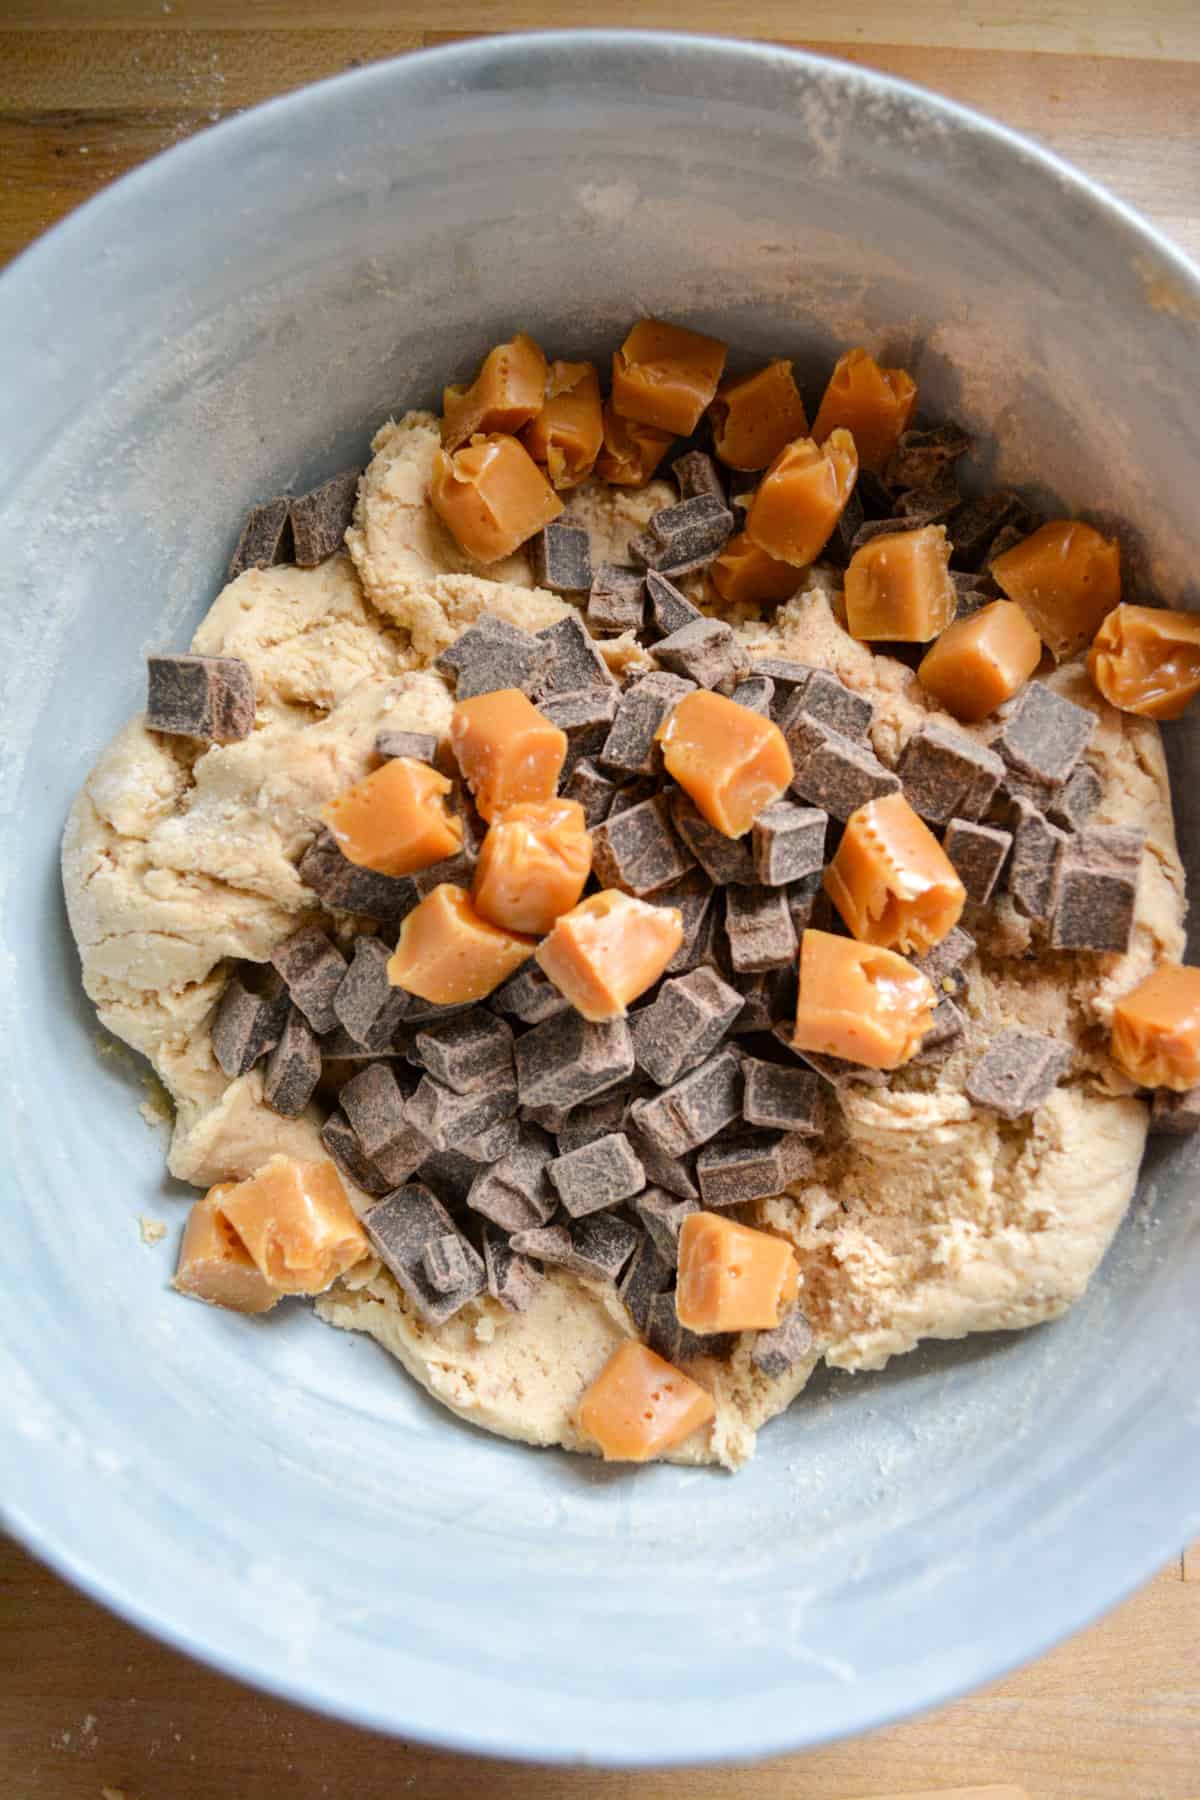 Caramel candy and chocolate chips added into the cookie dough.